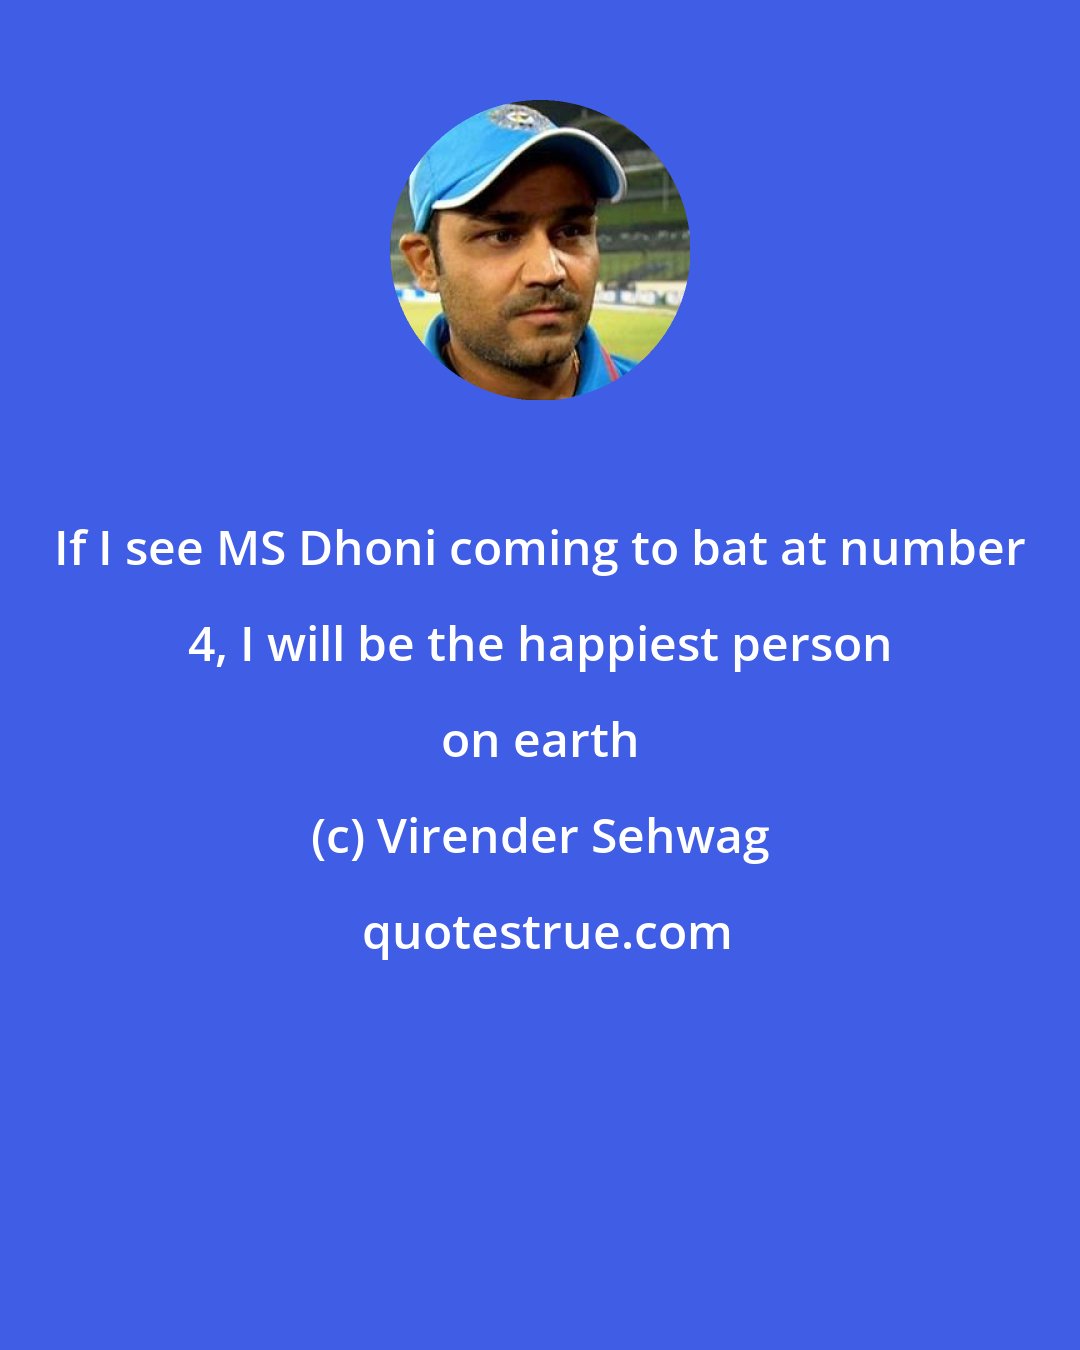 Virender Sehwag: If I see MS Dhoni coming to bat at number 4, I will be the happiest person on earth